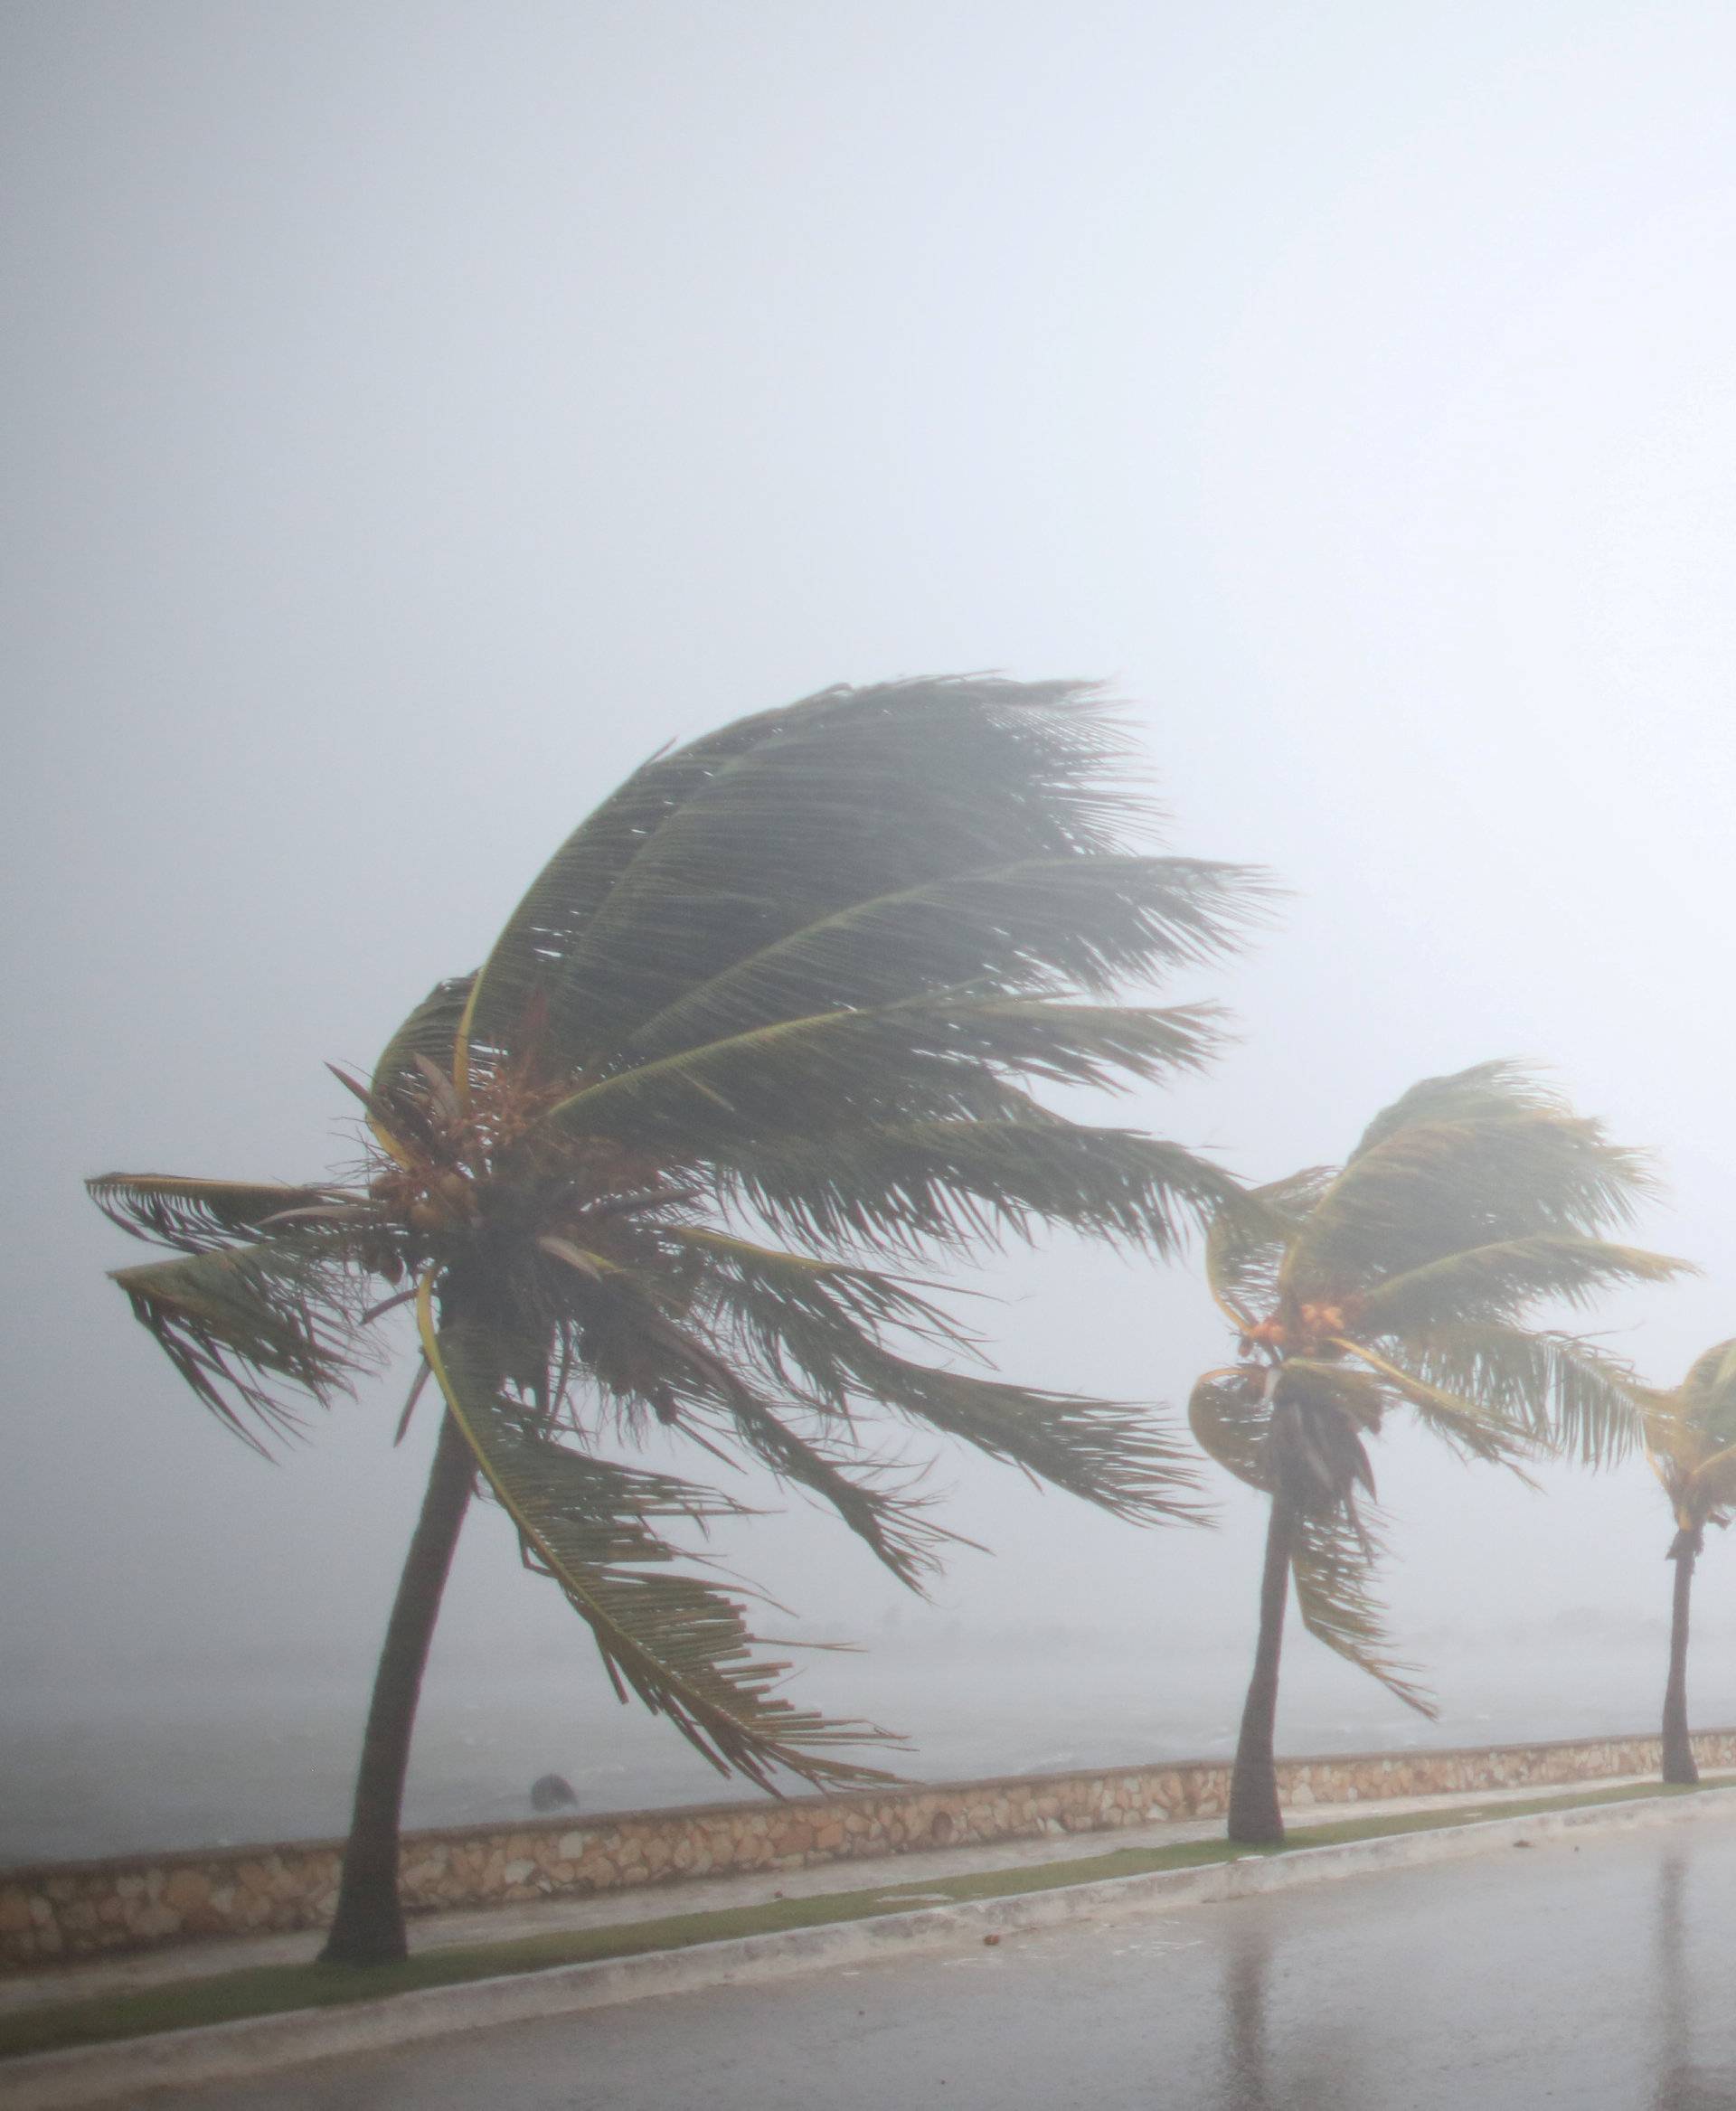 Palm trees sway in the wind prior to the arrival of the Hurricane Irma in Caibarien